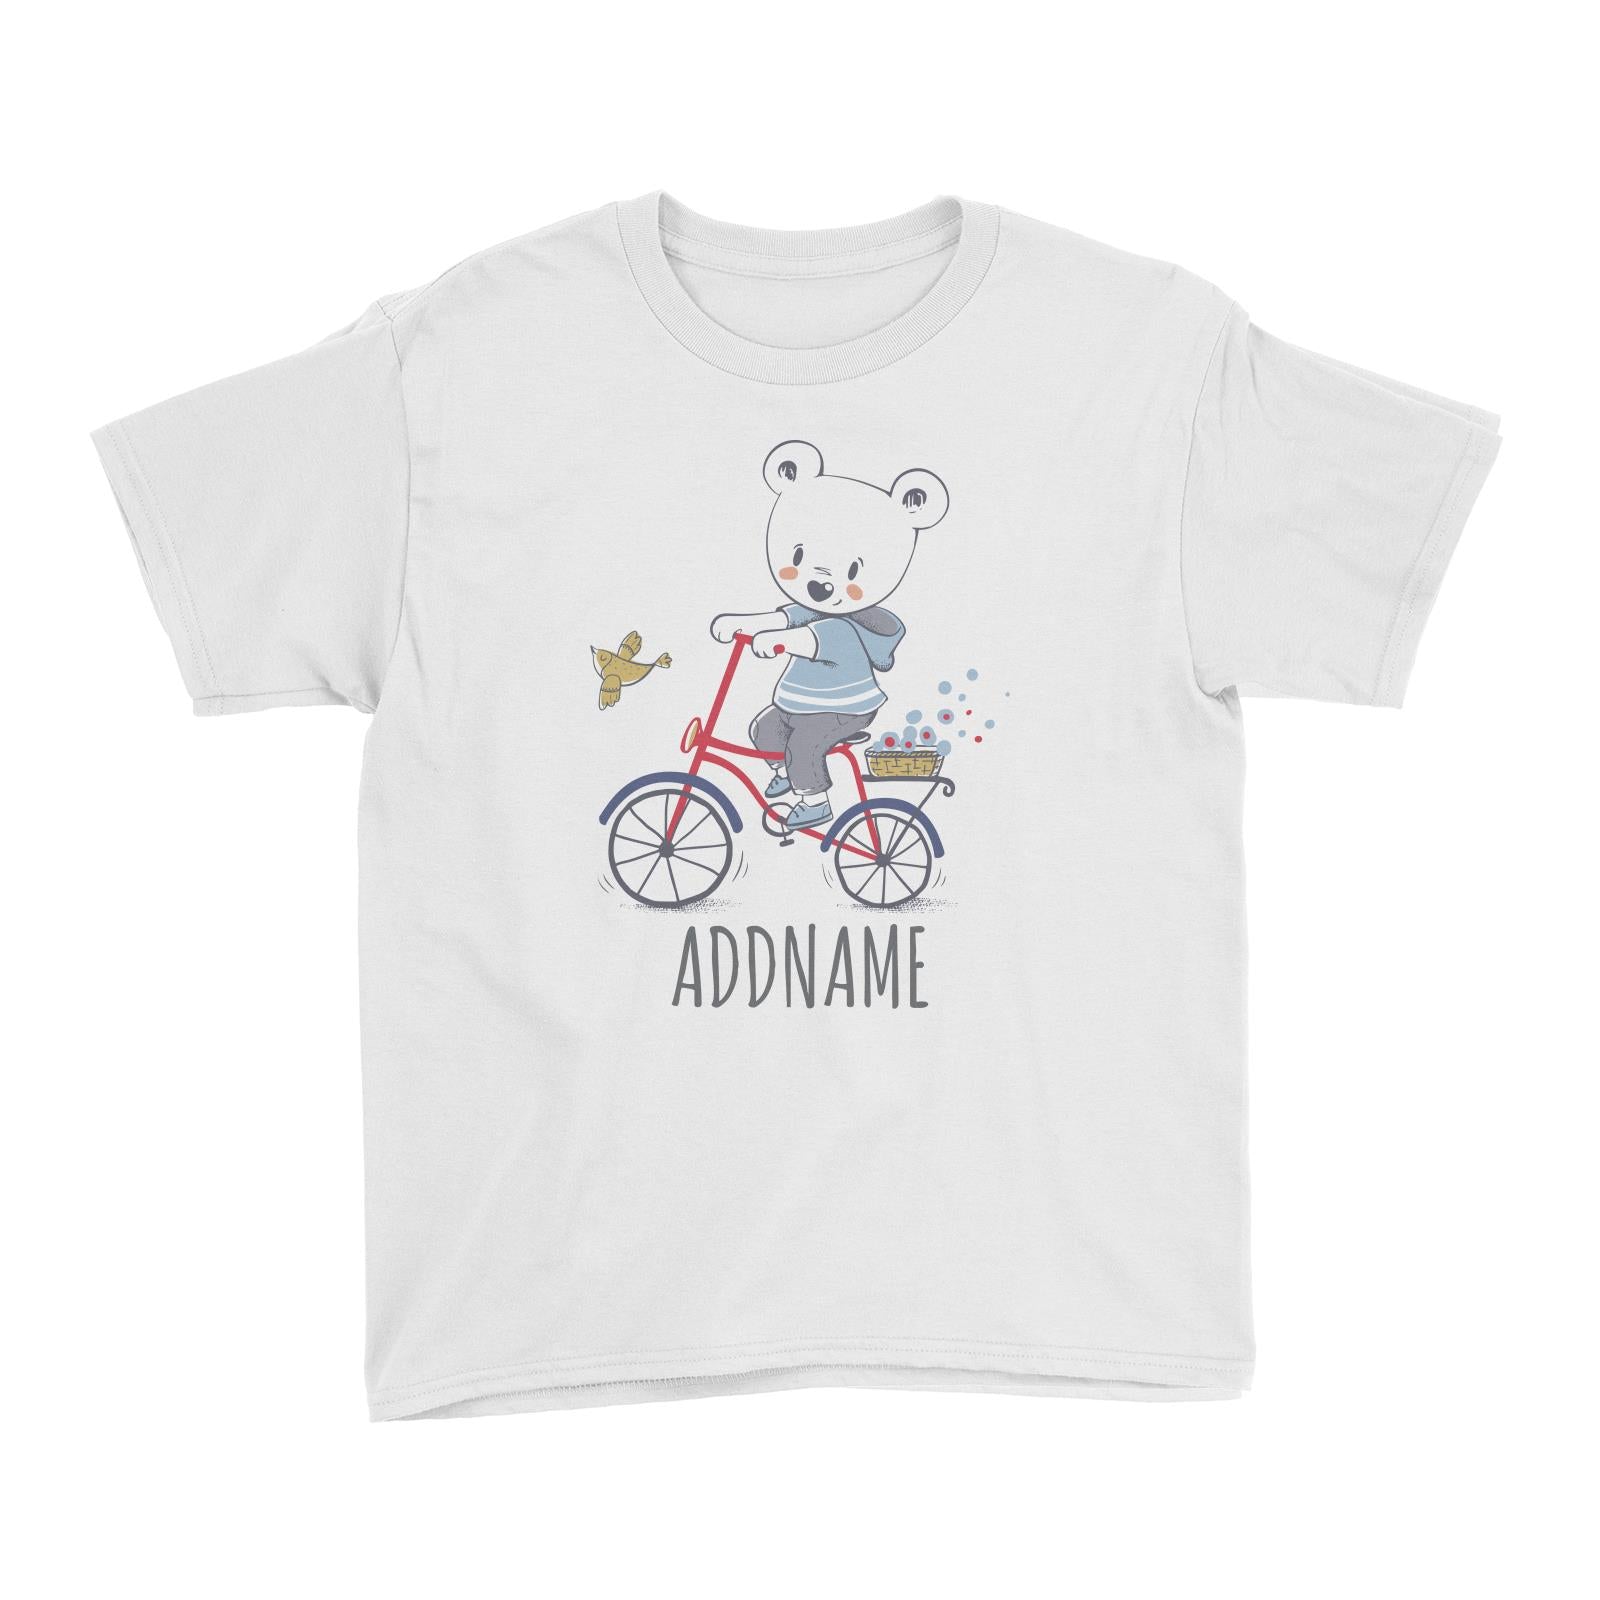 Bear on Bicycle White Kid's T-Shirt Personalizable Designs Cute Sweet Animal For Boys HG